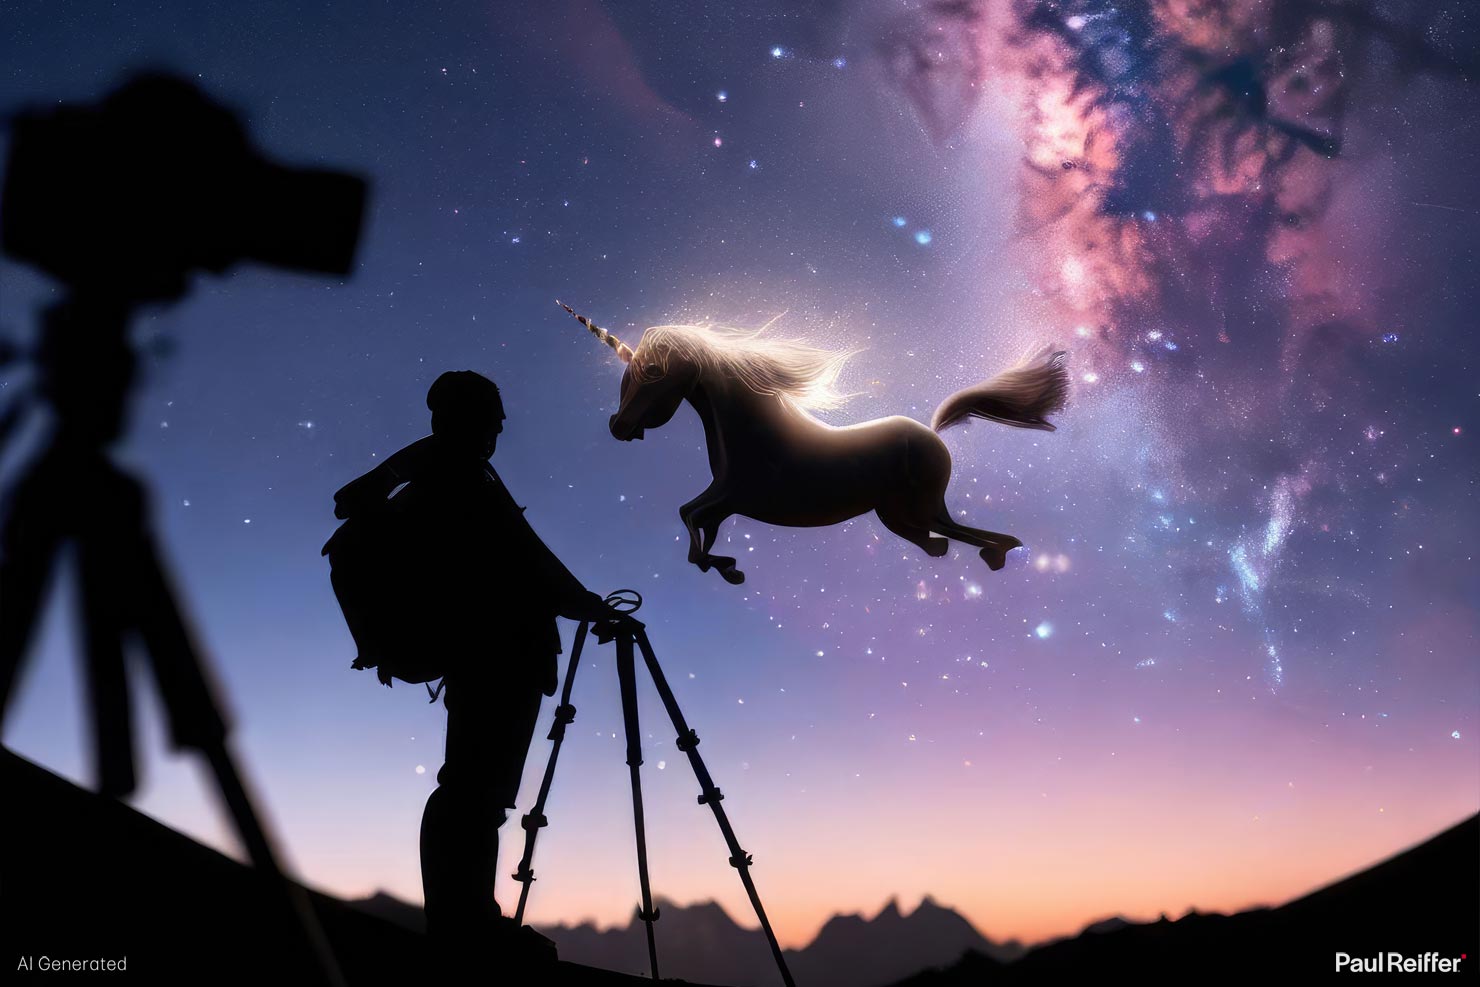 Unicorn Header Stars Astro Fake Midjourney Stable Diffusion Dall E Pink Sky Photographers Landscape How To Use AI Images Good Bad Review Bard Bing ChatGPT Guide Paul Reiffer